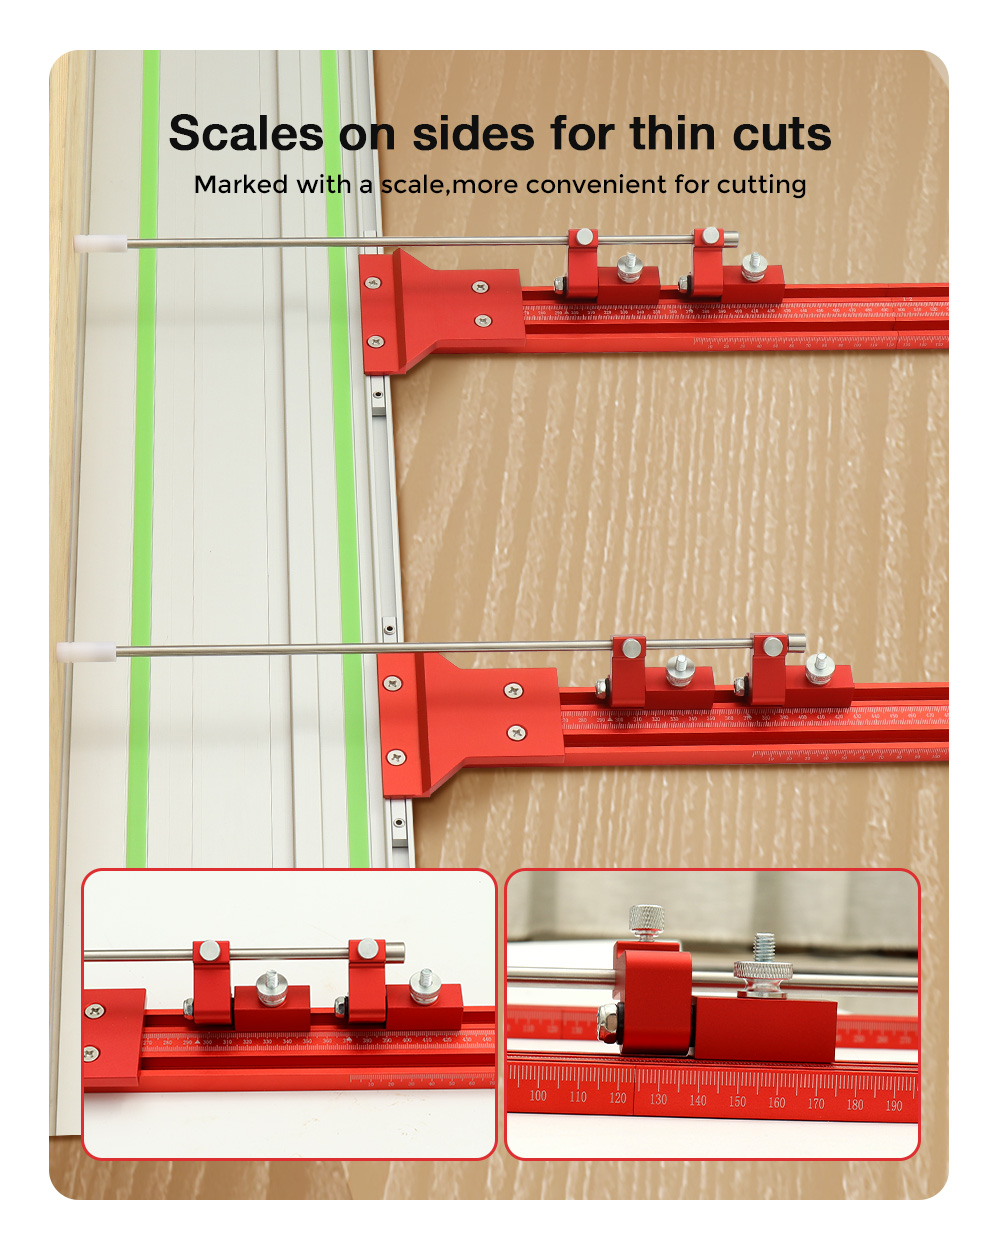 Upgraded-Aluminum-Alloy-Parallel-Guide-System-for-Repeatable-Cuts-for-Track-Saw-Rail-Fit-for-Festool-1912623-2